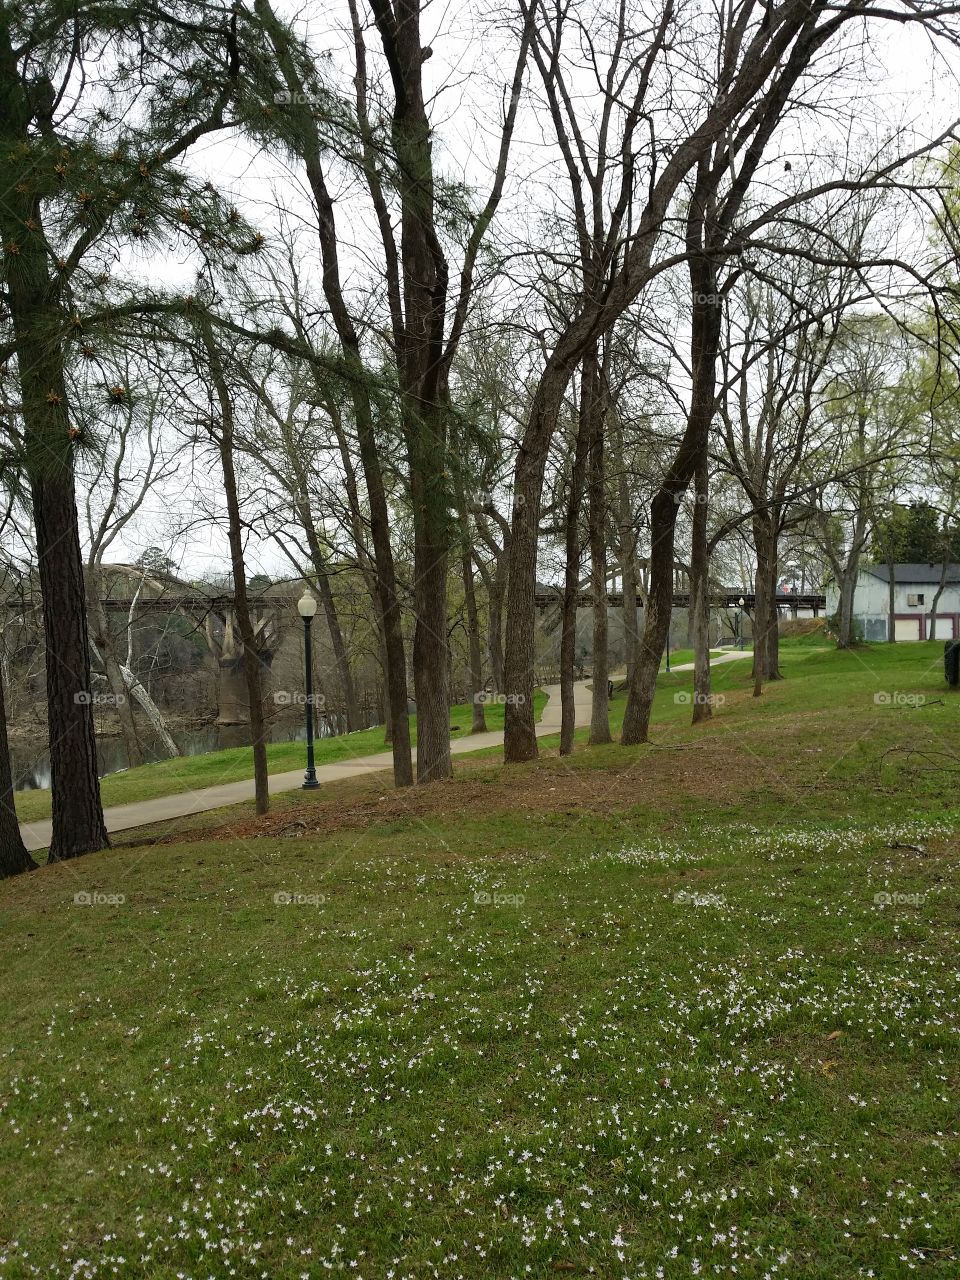 Tranquil hillside path in early spring in Alabama.